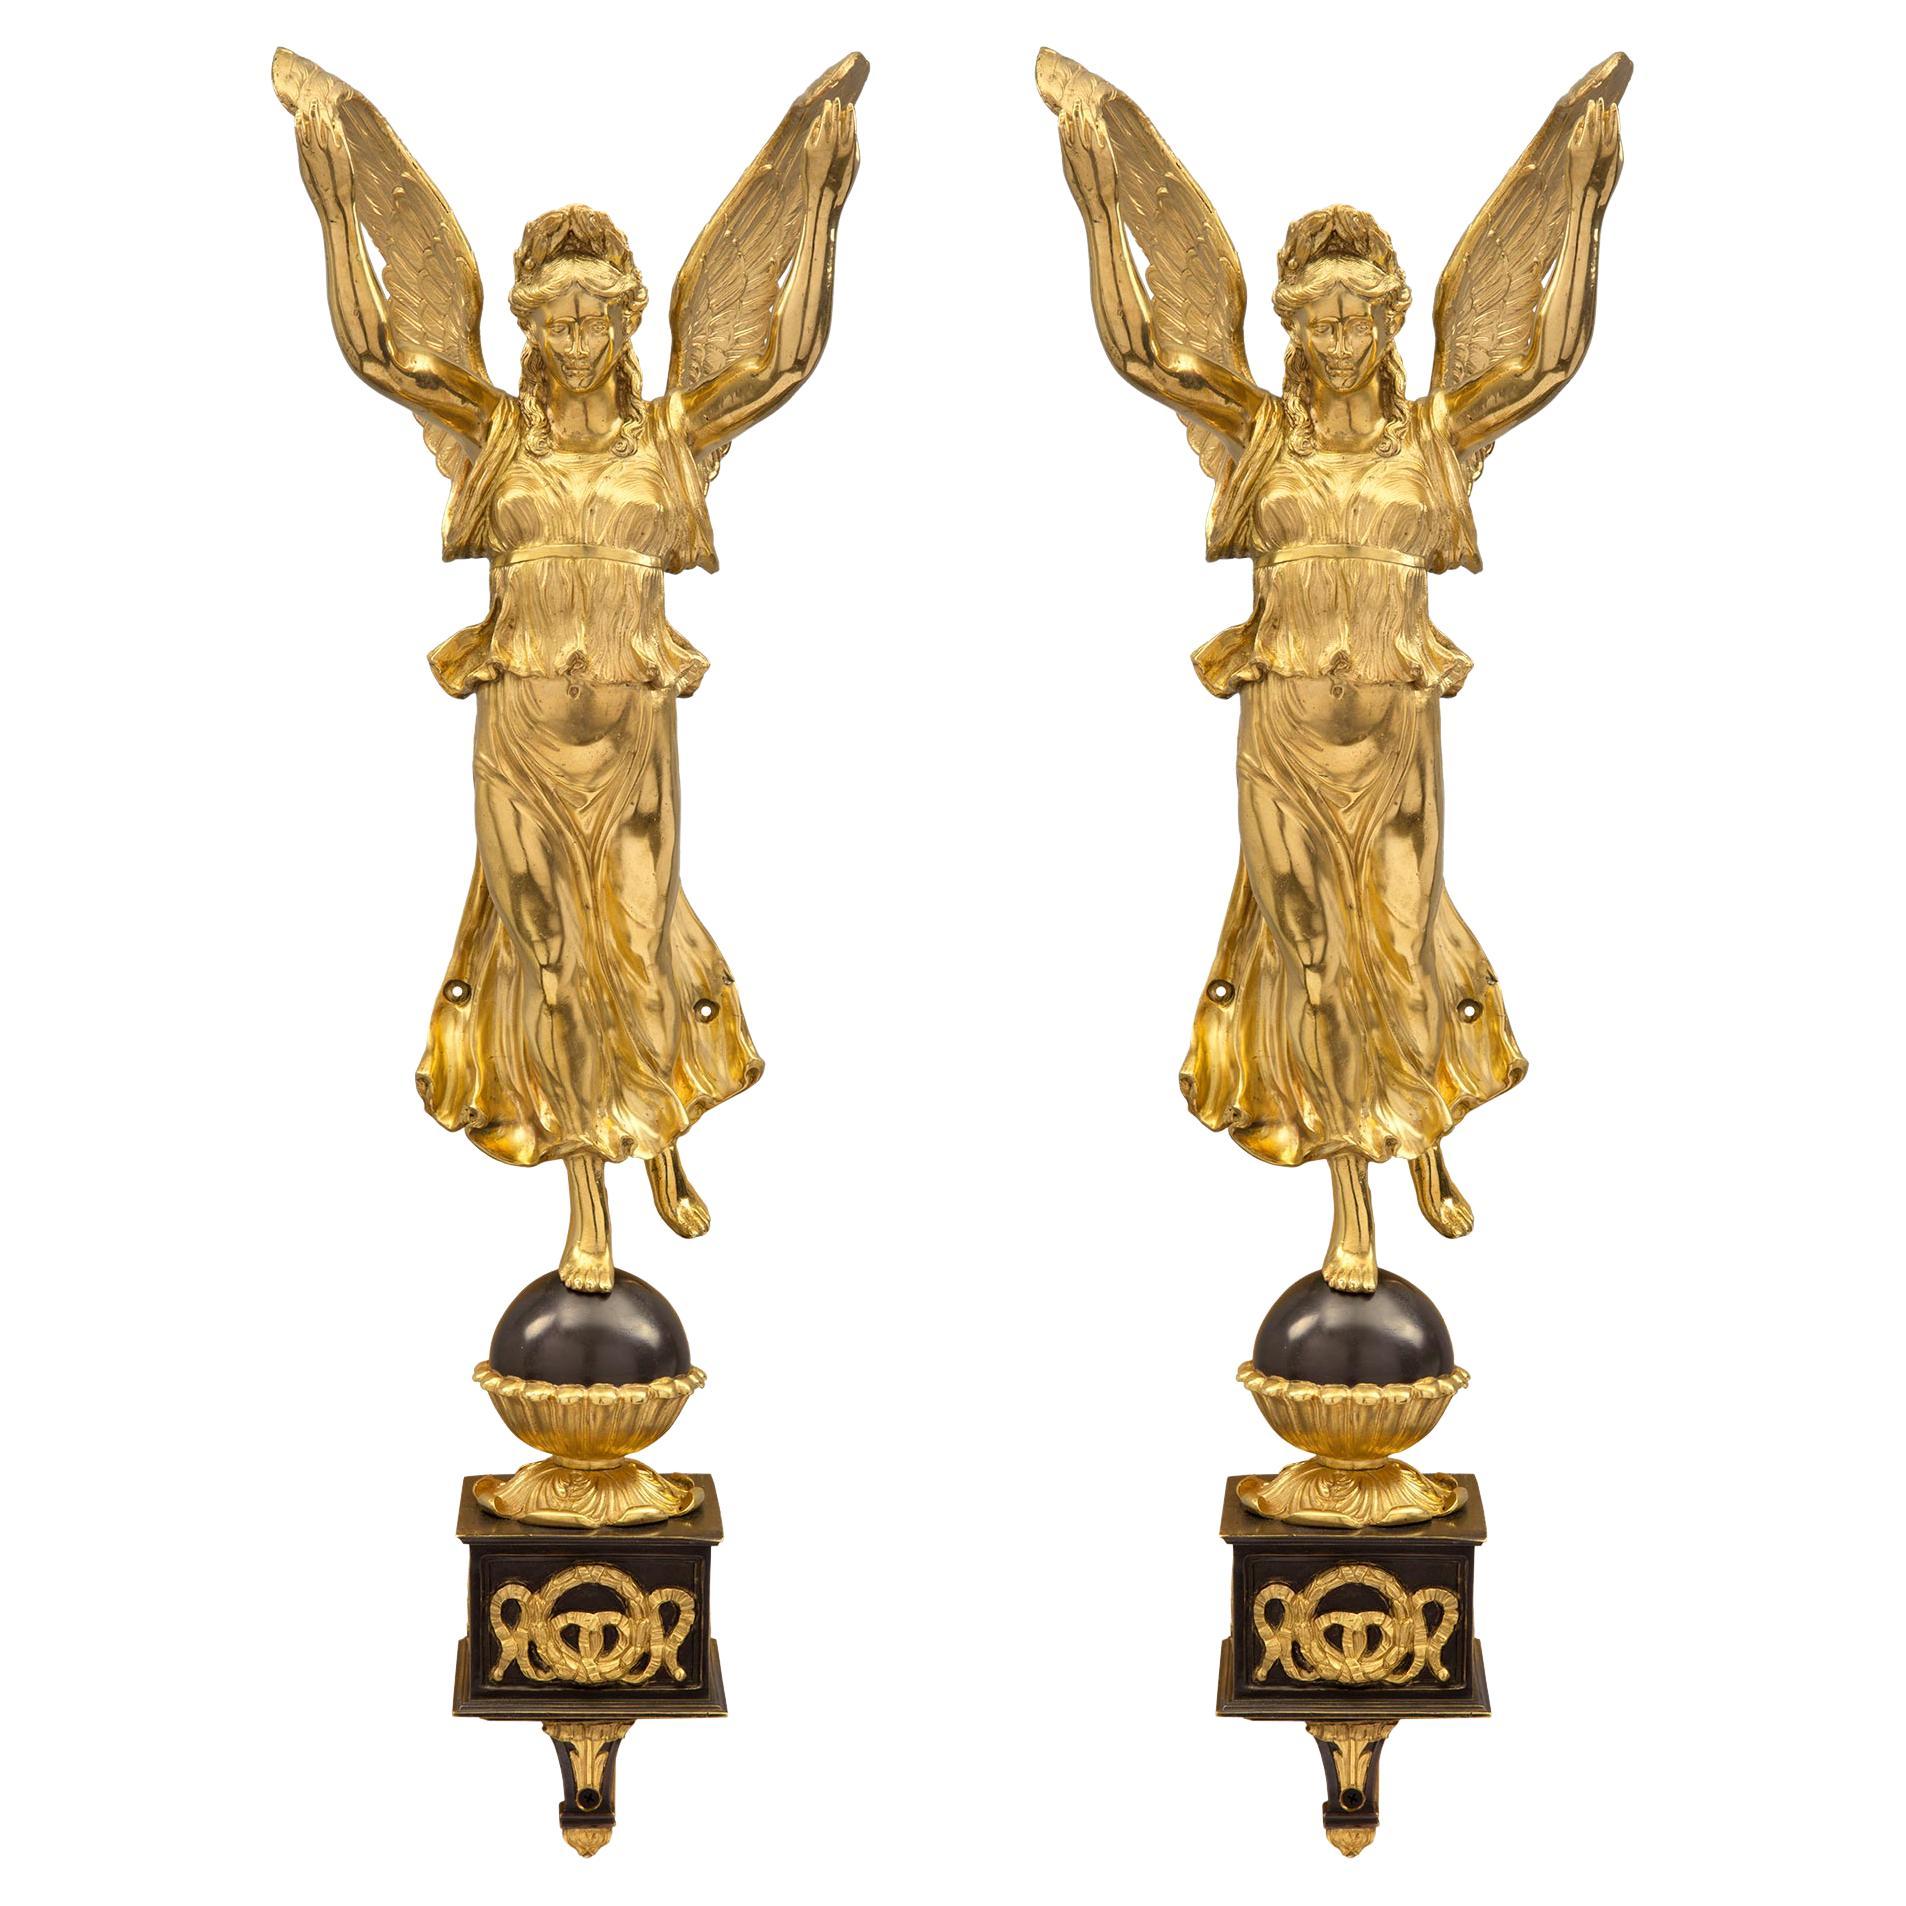 Pair of French 19th Century Neo-Classical St. Bronze and Ormolu Wall Decor For Sale